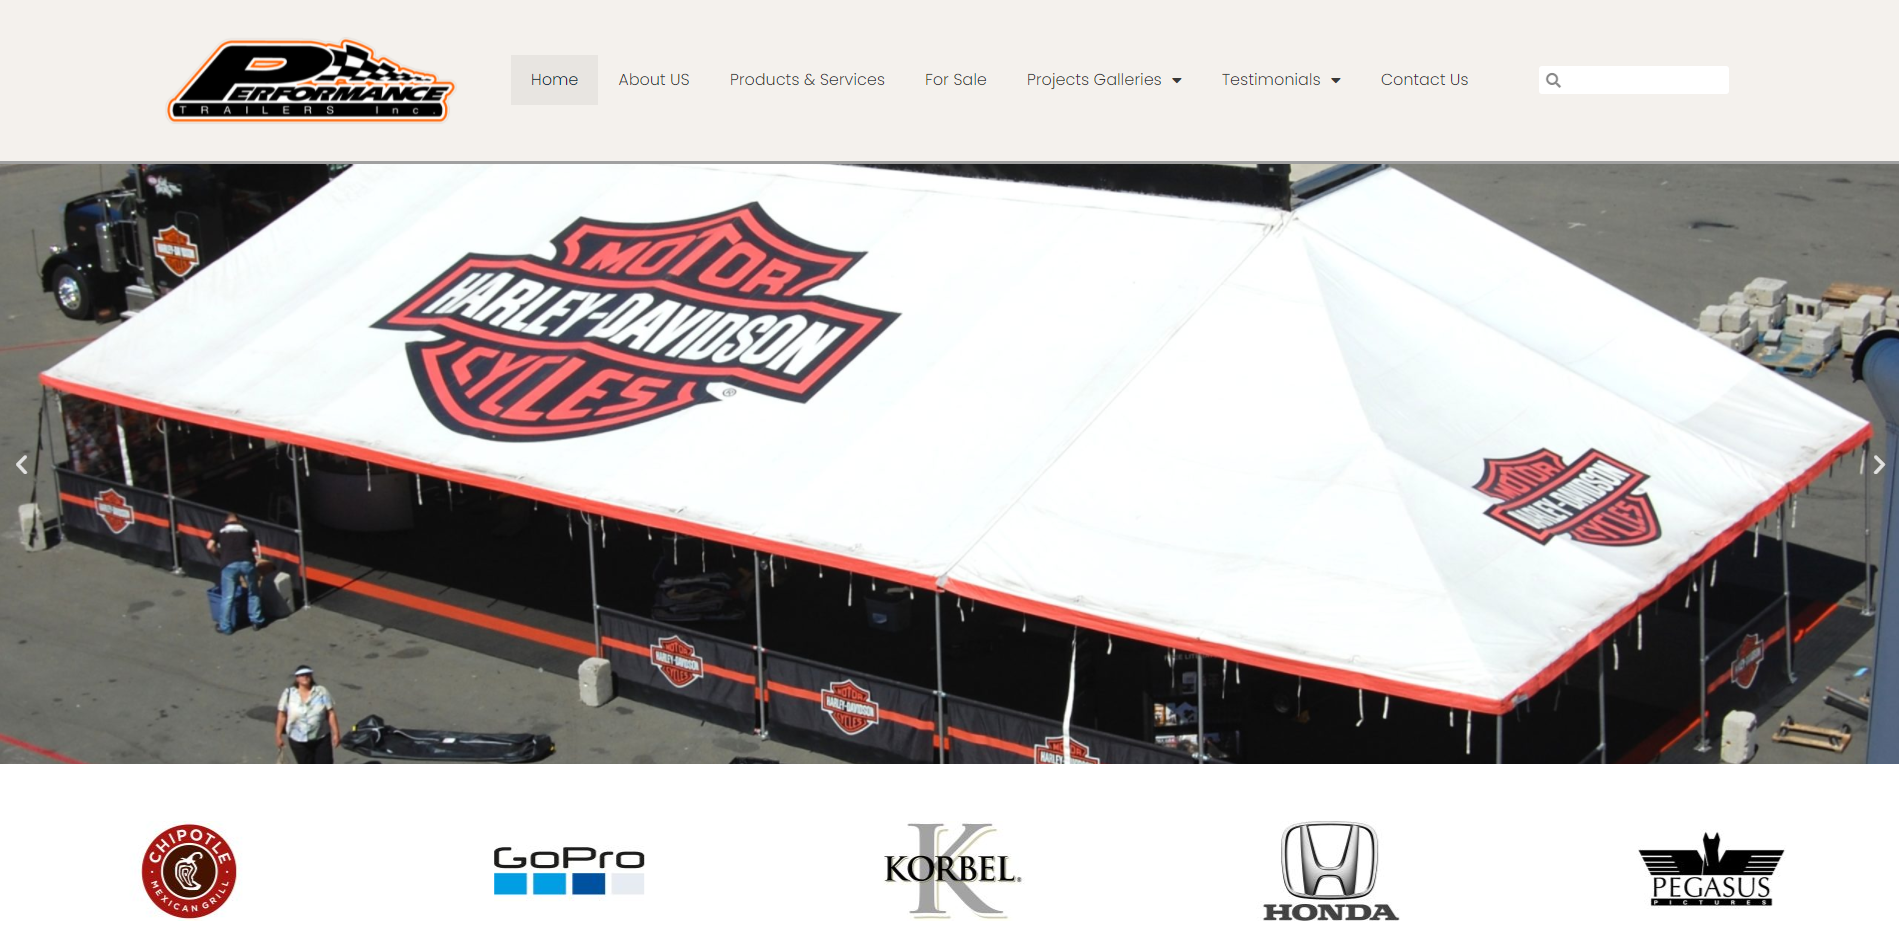 Performance Trailers site